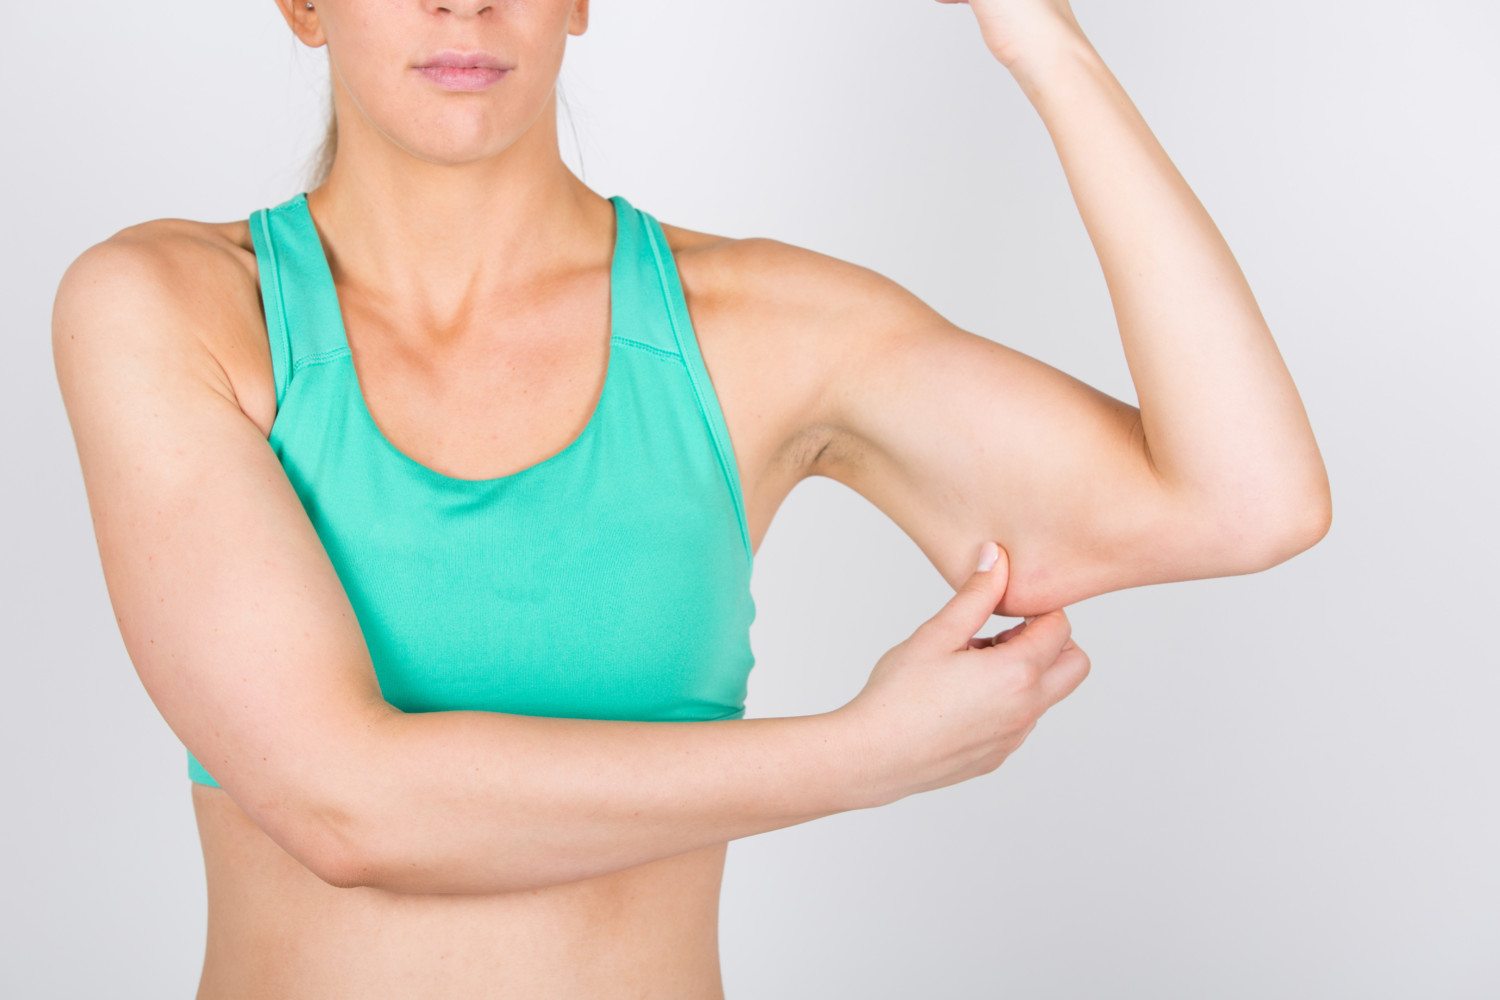 How To Lose That Annoying Underarm 'Batwing' Fat.